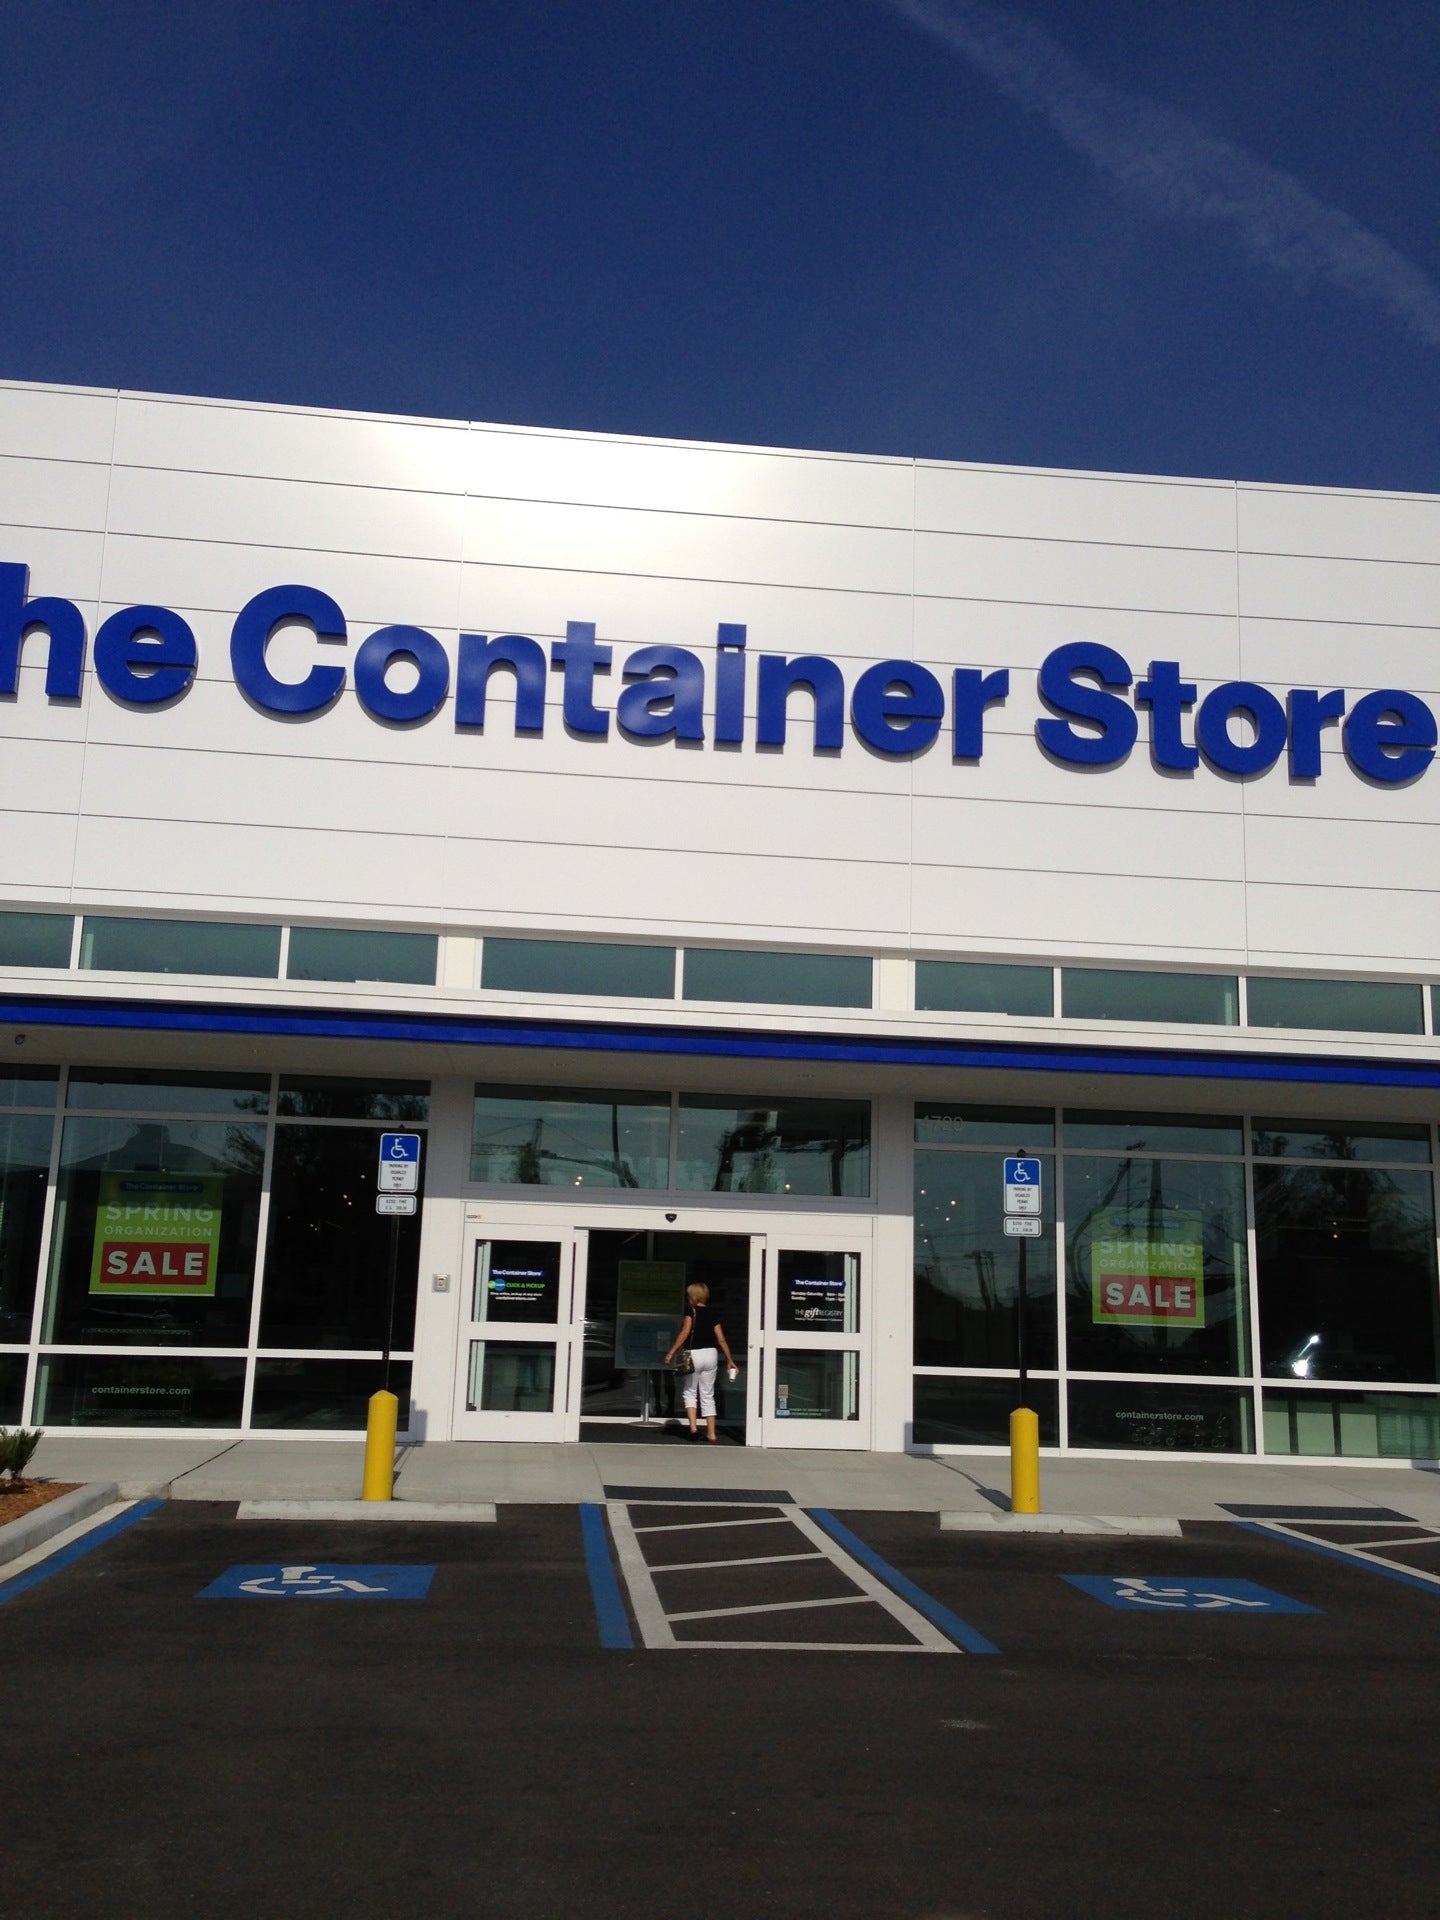 The Container Store ✓